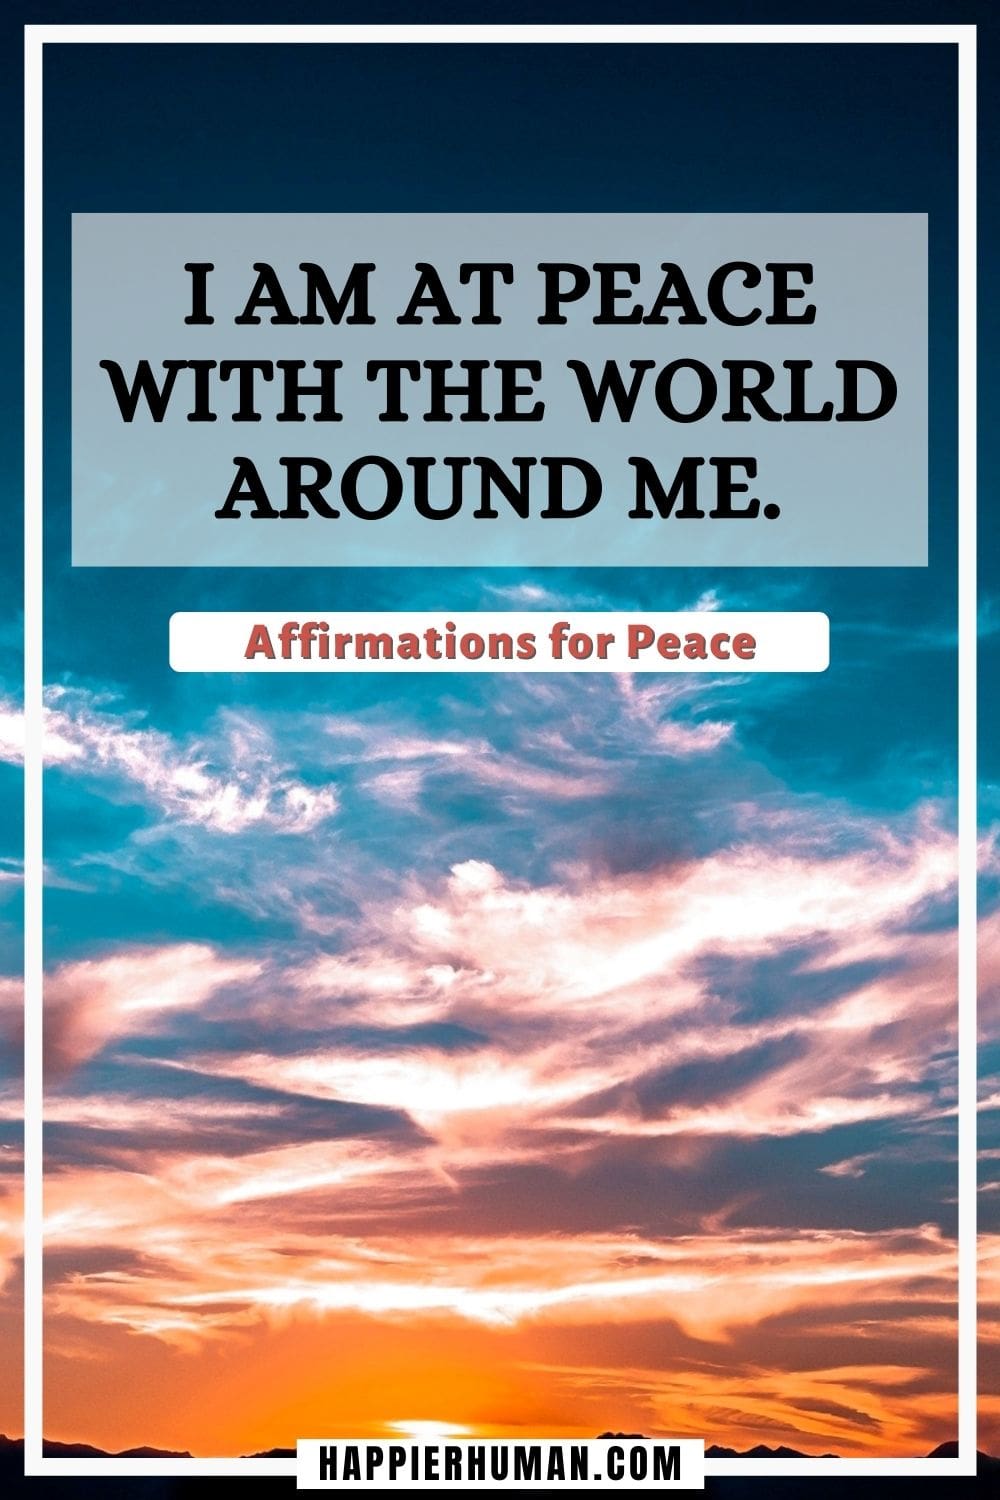 Affirmations for Peace - I am at peace with the world around me. | affirmations for peace of mind | affirmations for peace and happiness | affirmations for peace and harmony #affirmation #dailyaffirmations #happiness